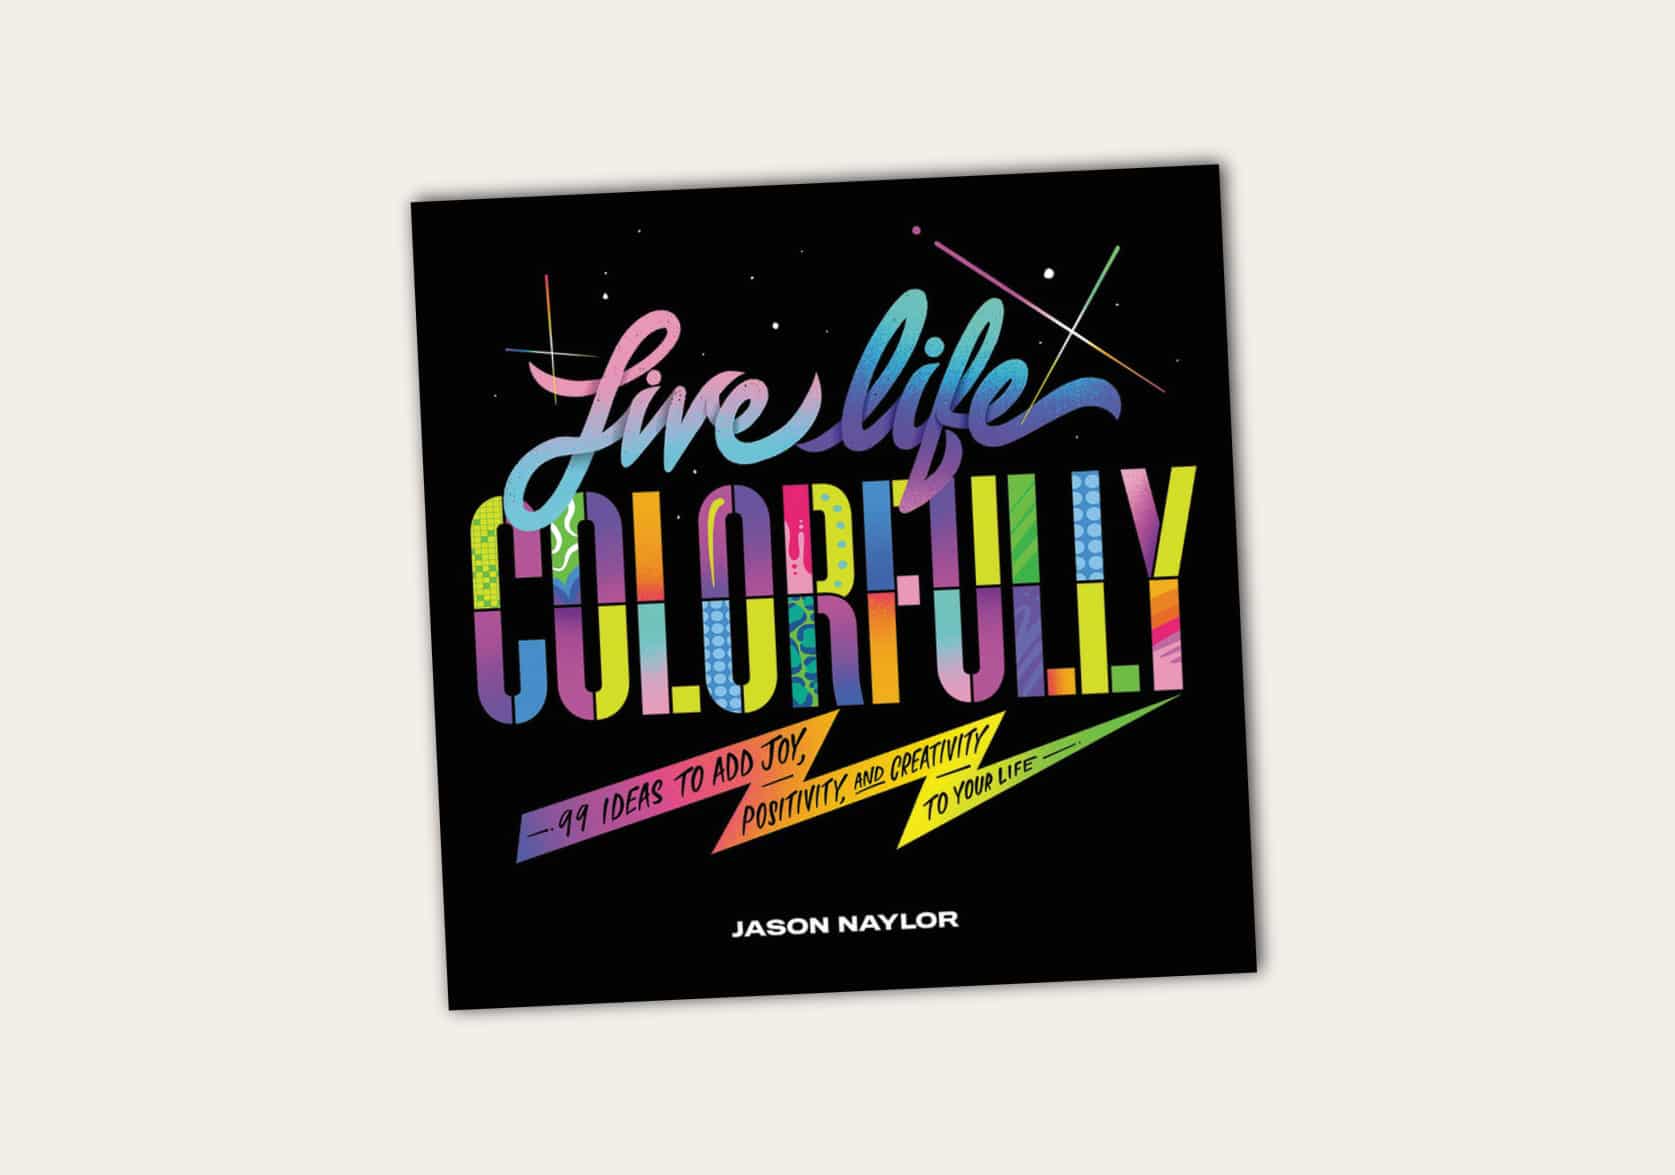 Live Life Colorfully: 99 Ideas to Add Joy, Positivity and Creativity to Your Life by Jason Naylor